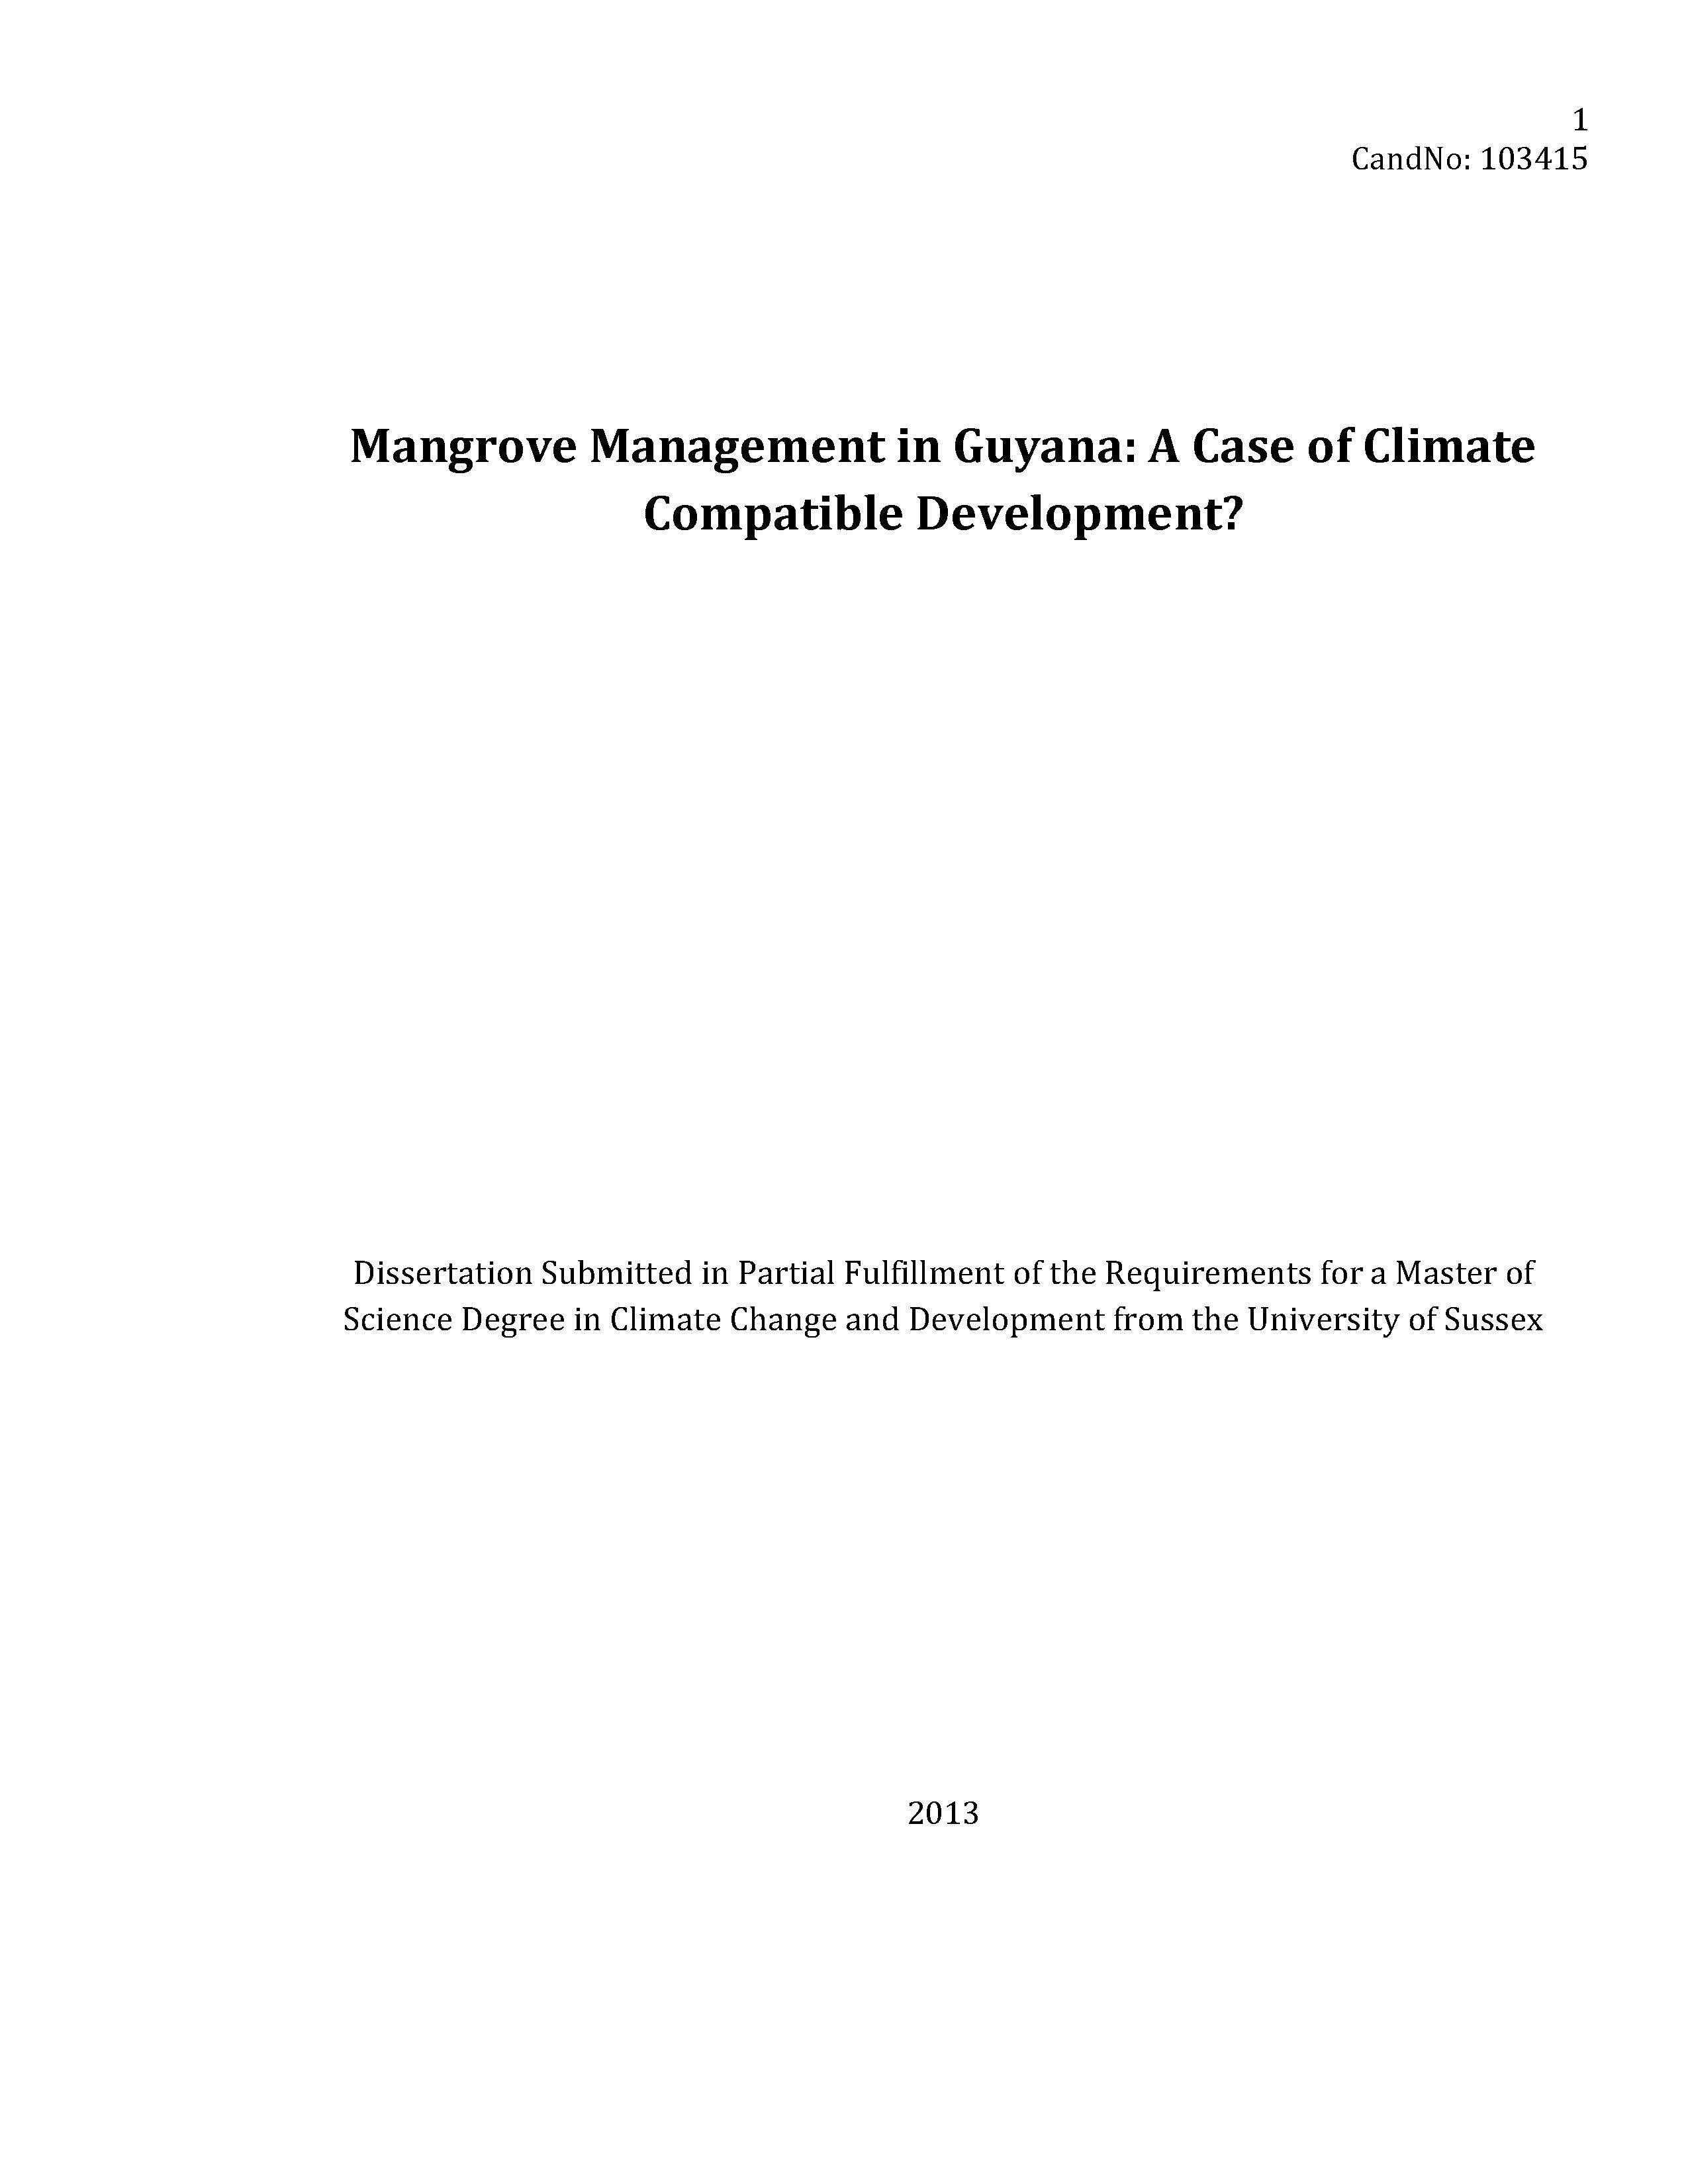 Mangrove Management in Guyana: A Case of Climate Compatible Development